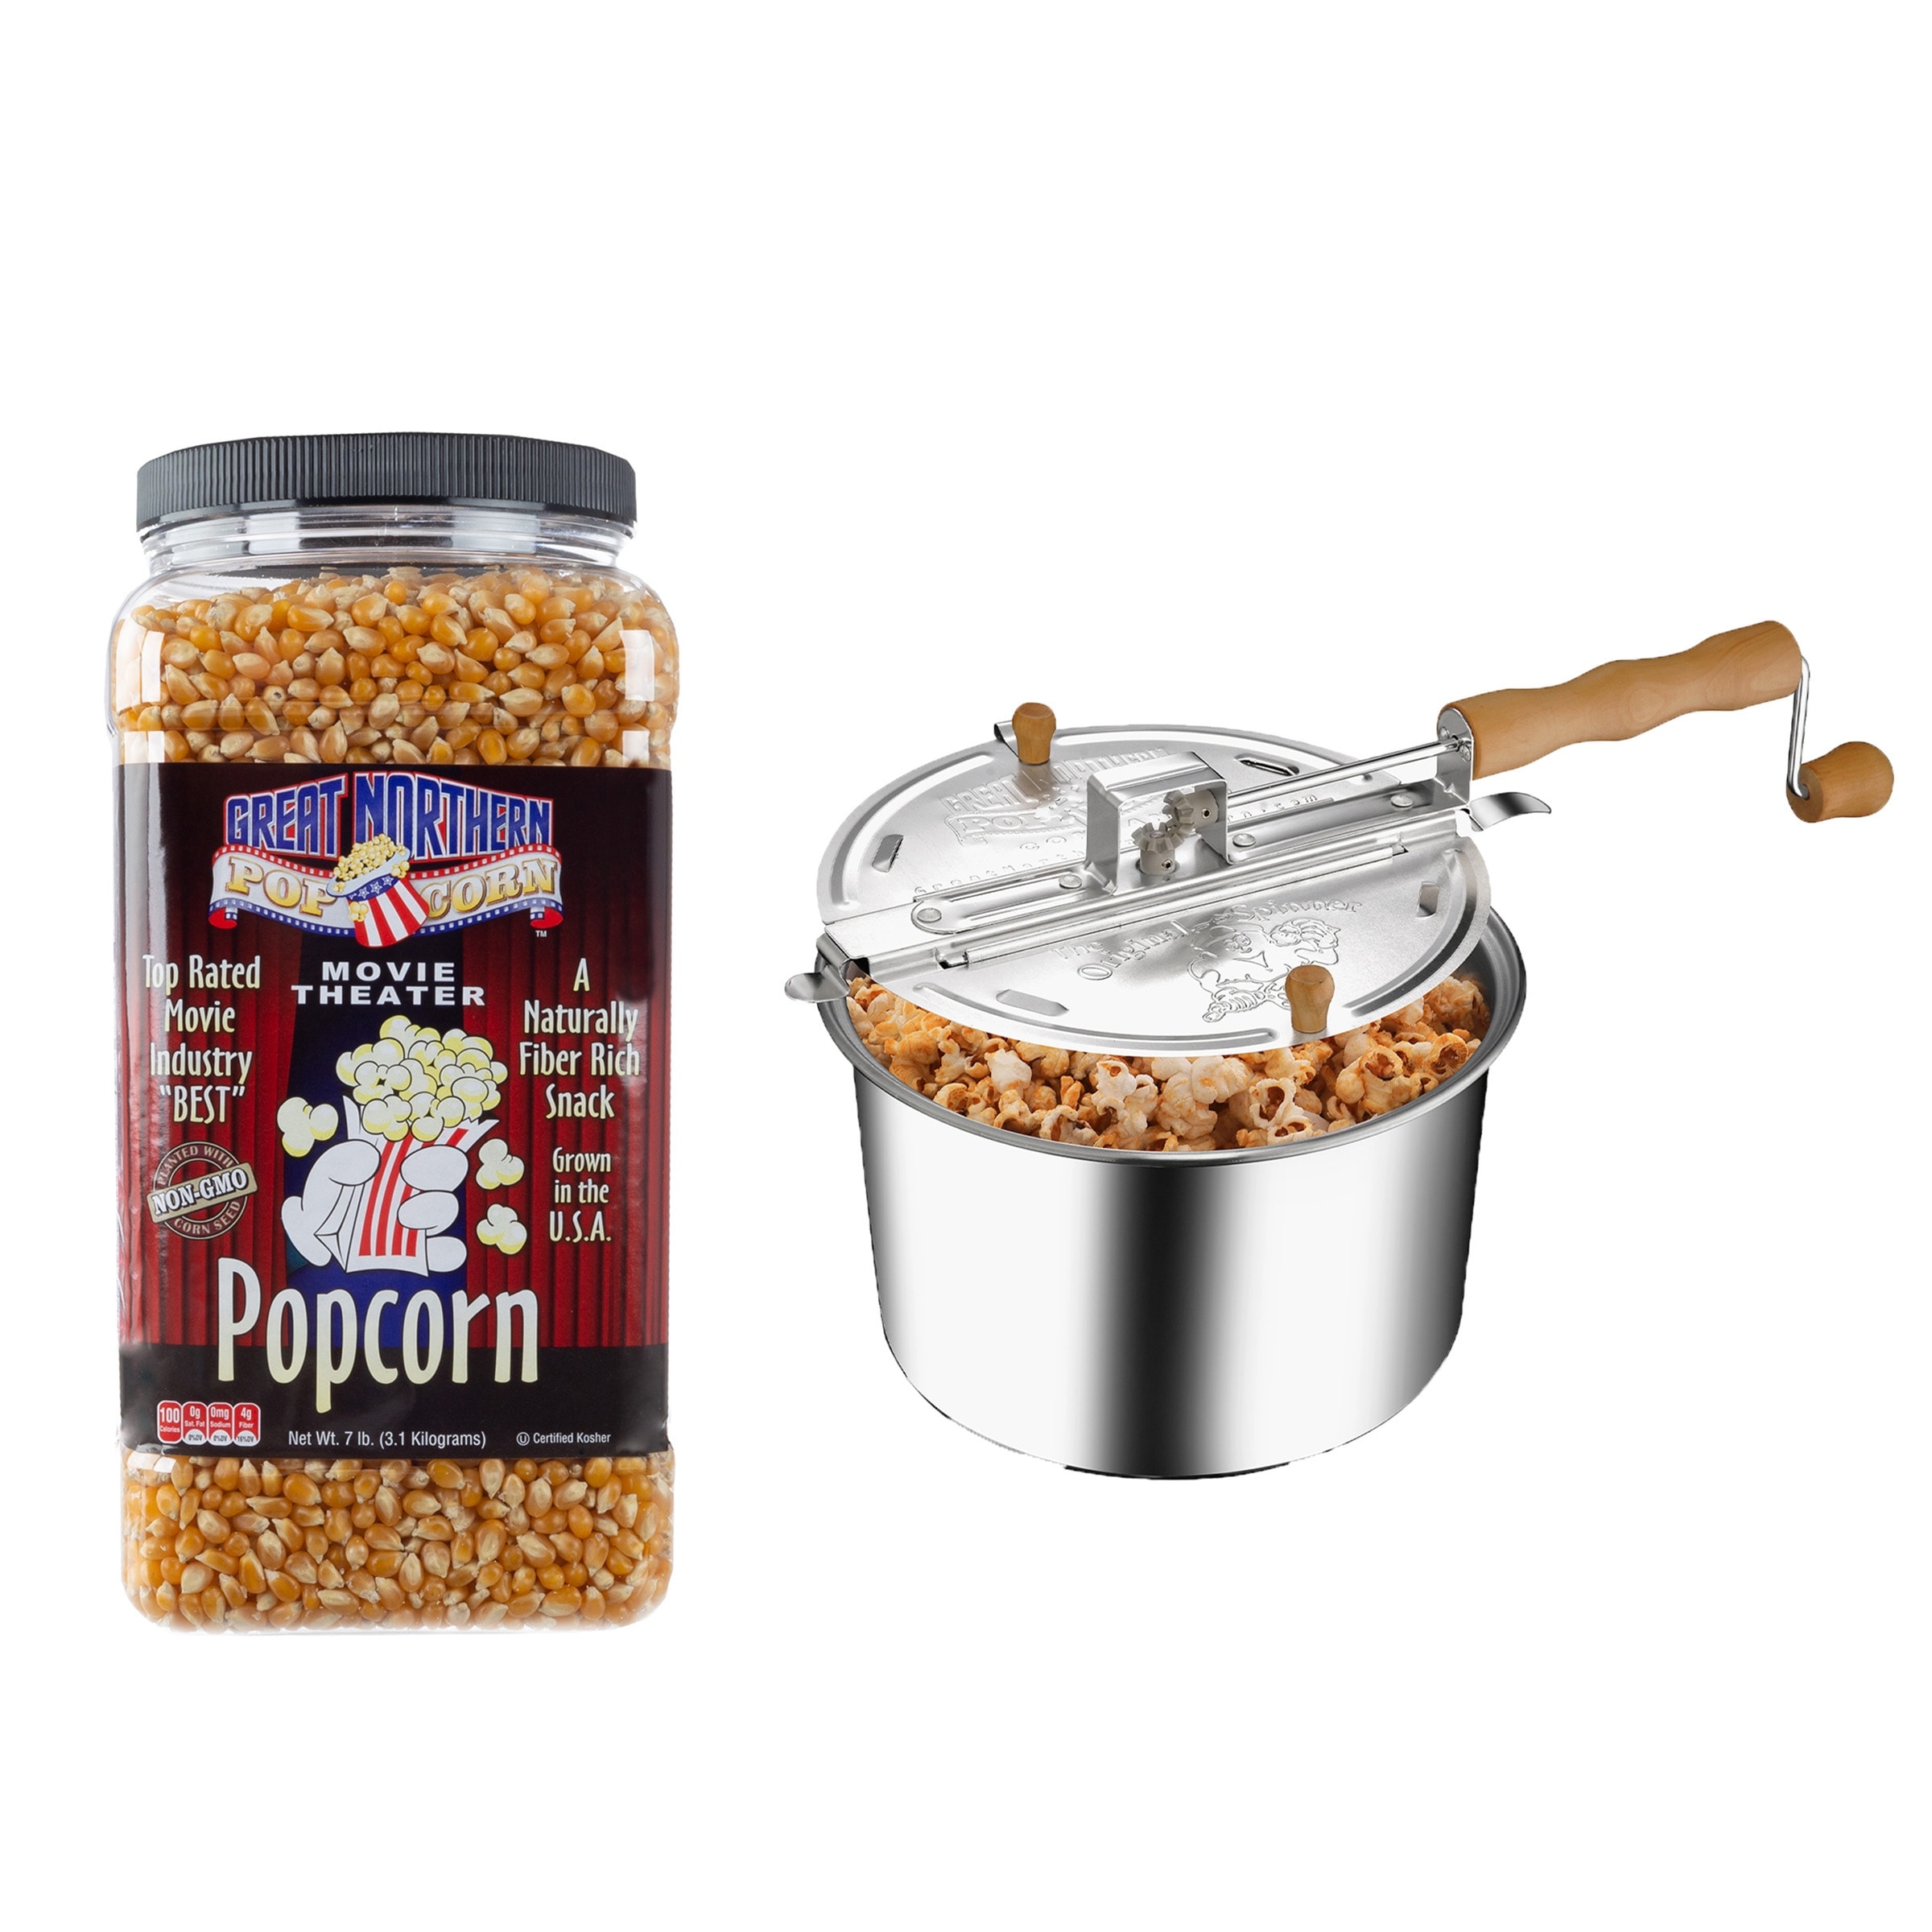 https://ak1.ostkcdn.com/images/products/is/images/direct/d04b39a903b740b52c1729f1158150eb15b4c817/Stove-Top-Popcorn-Maker-%E2%80%93-6.5-Quart-Stainless-Steel-Popper-with-7lbs-of-Popping-Corn-Kernels-by-Great-Northern-Popcorn.jpg